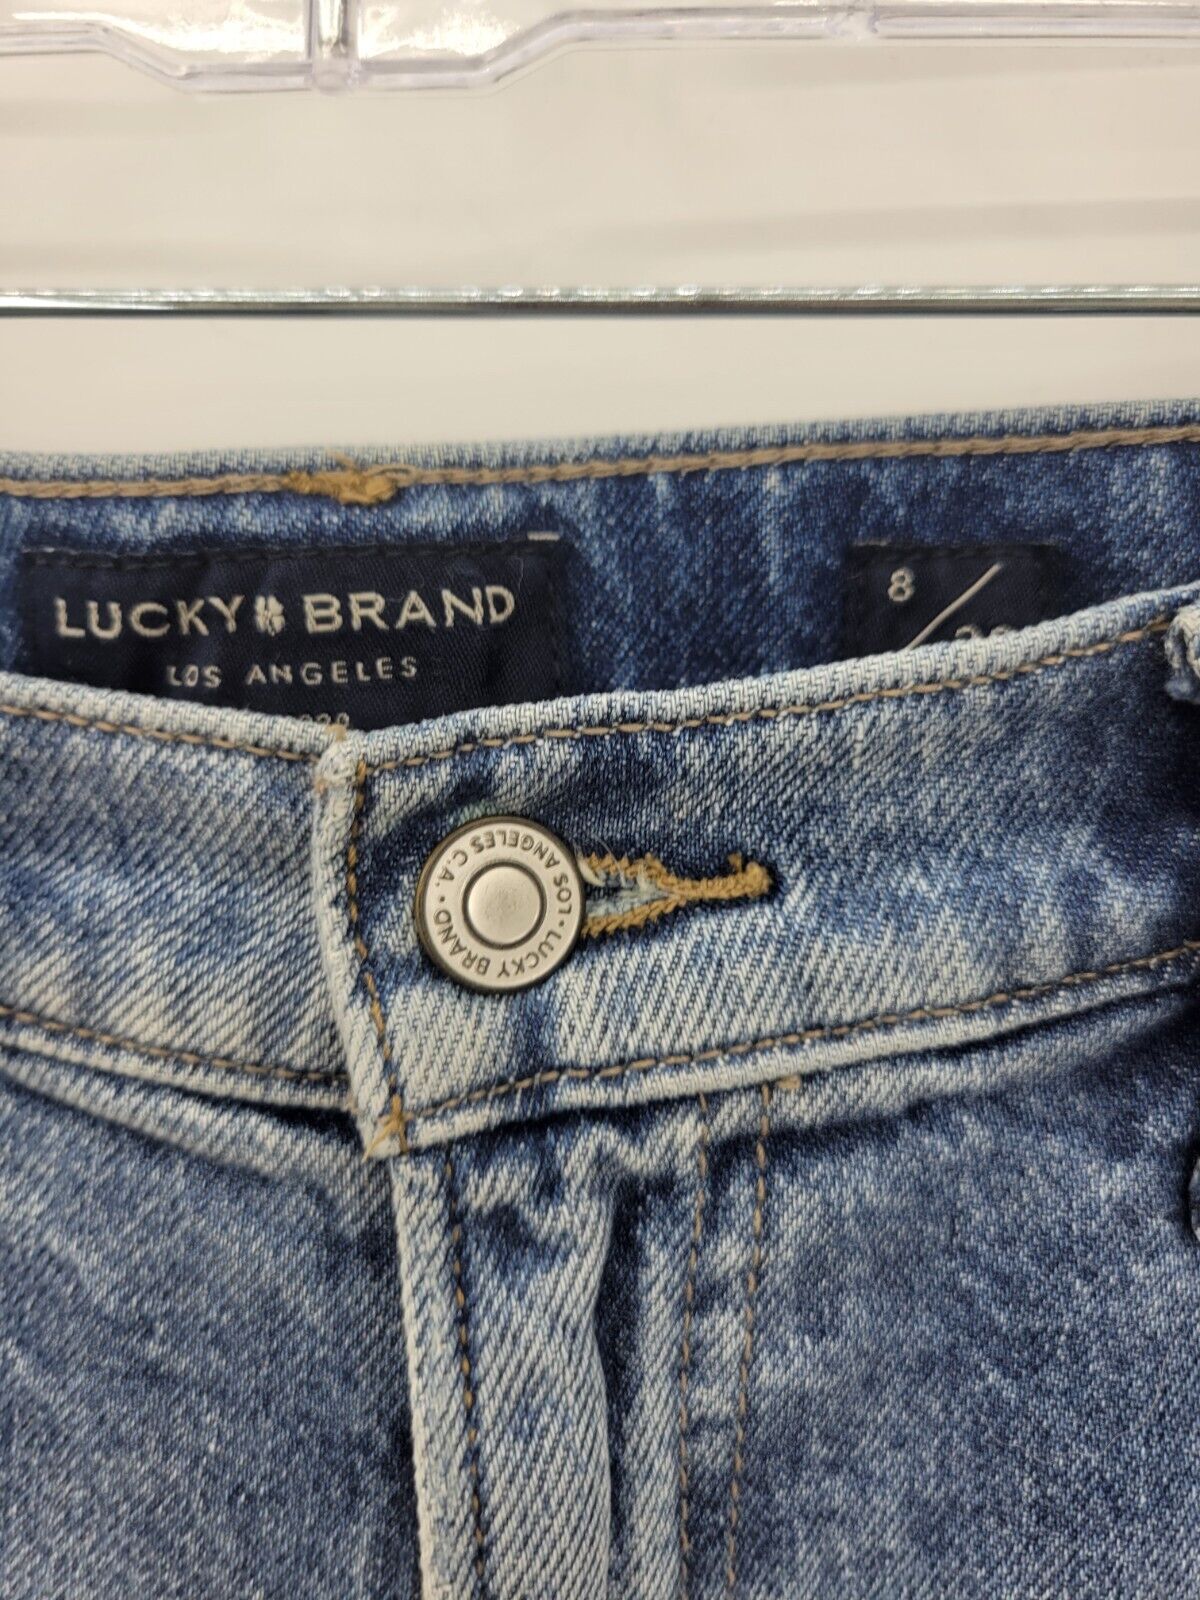 Lucky Brand Jeans Womens 8/29 Long High Rise Mom … - image 3